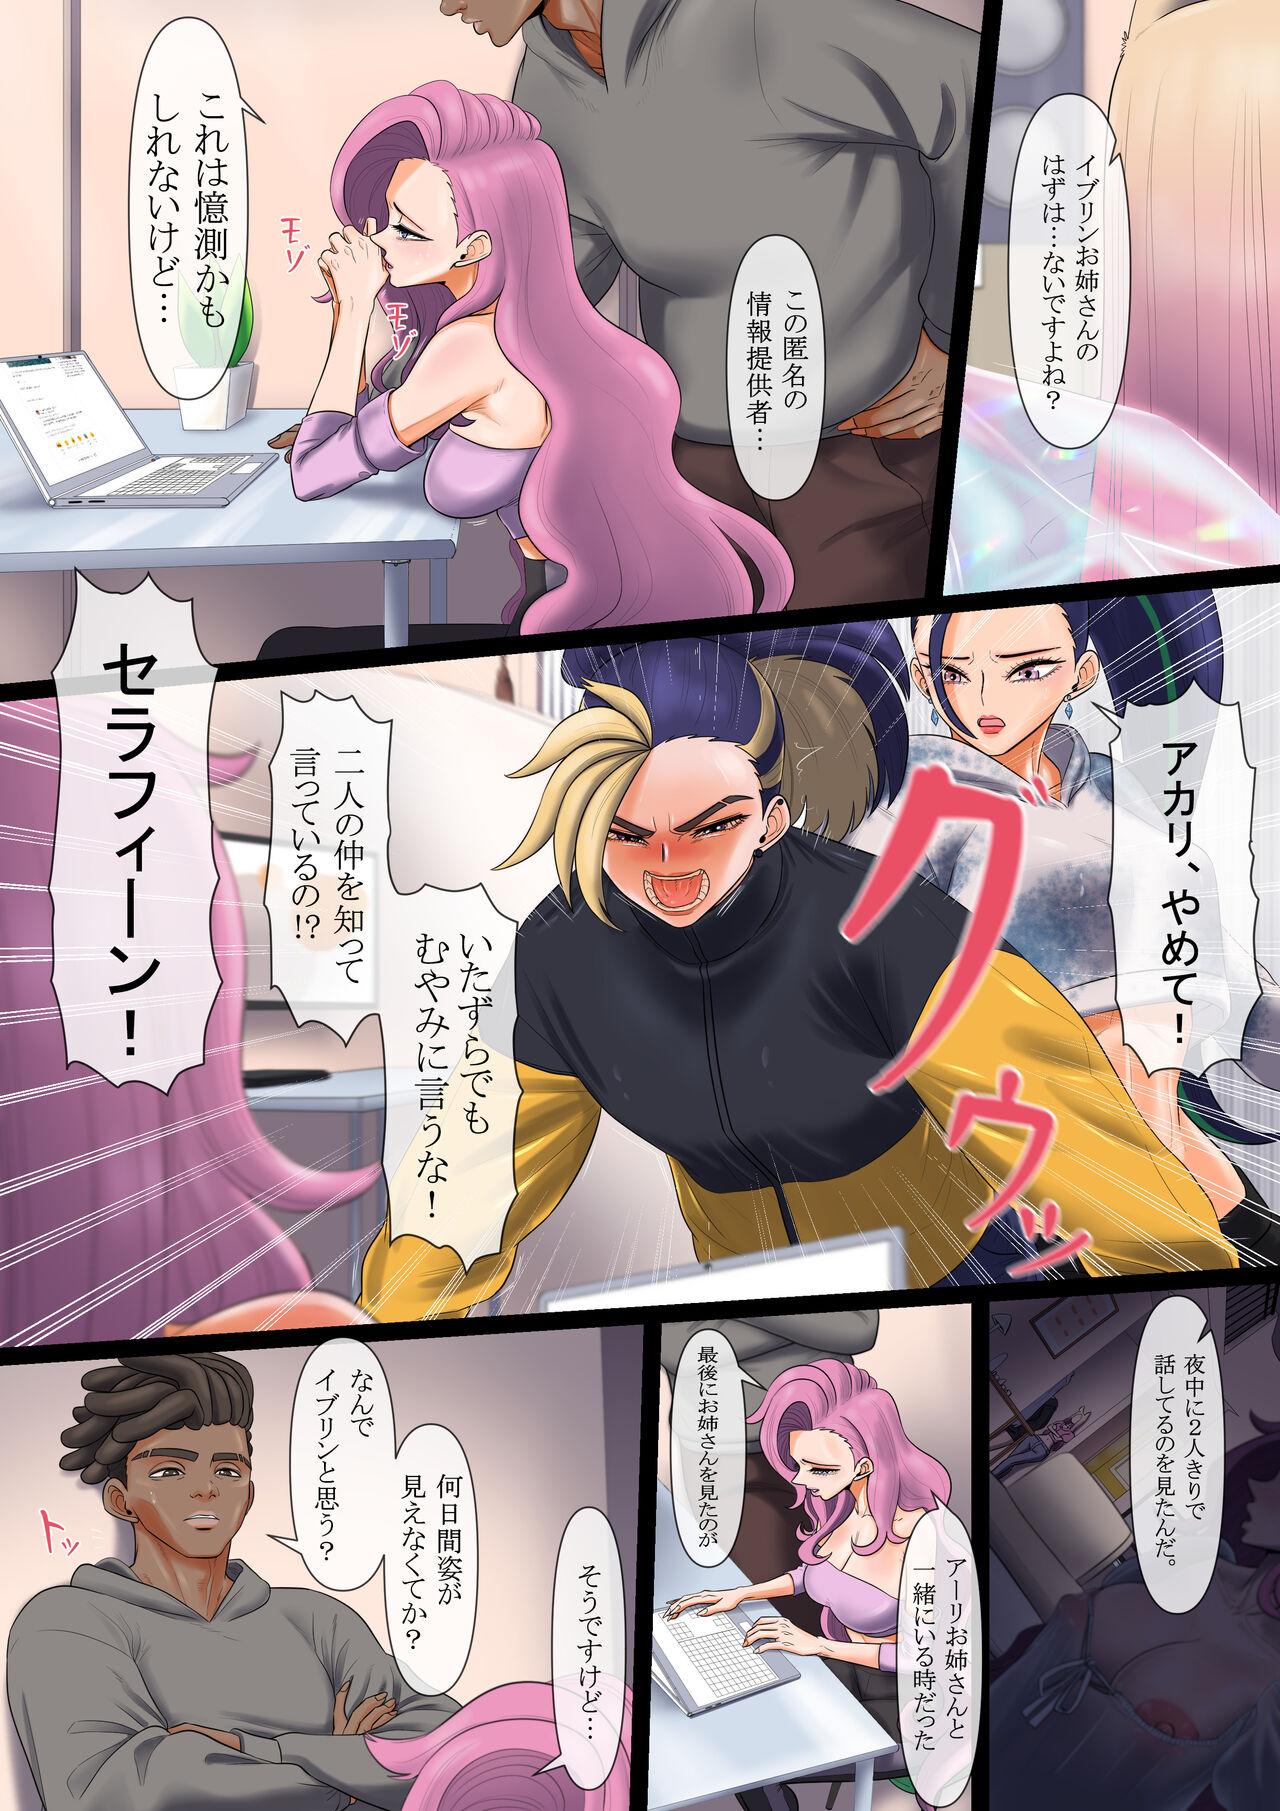 Milfsex 守りたいもの... - League of legends Close Up - Picture 3